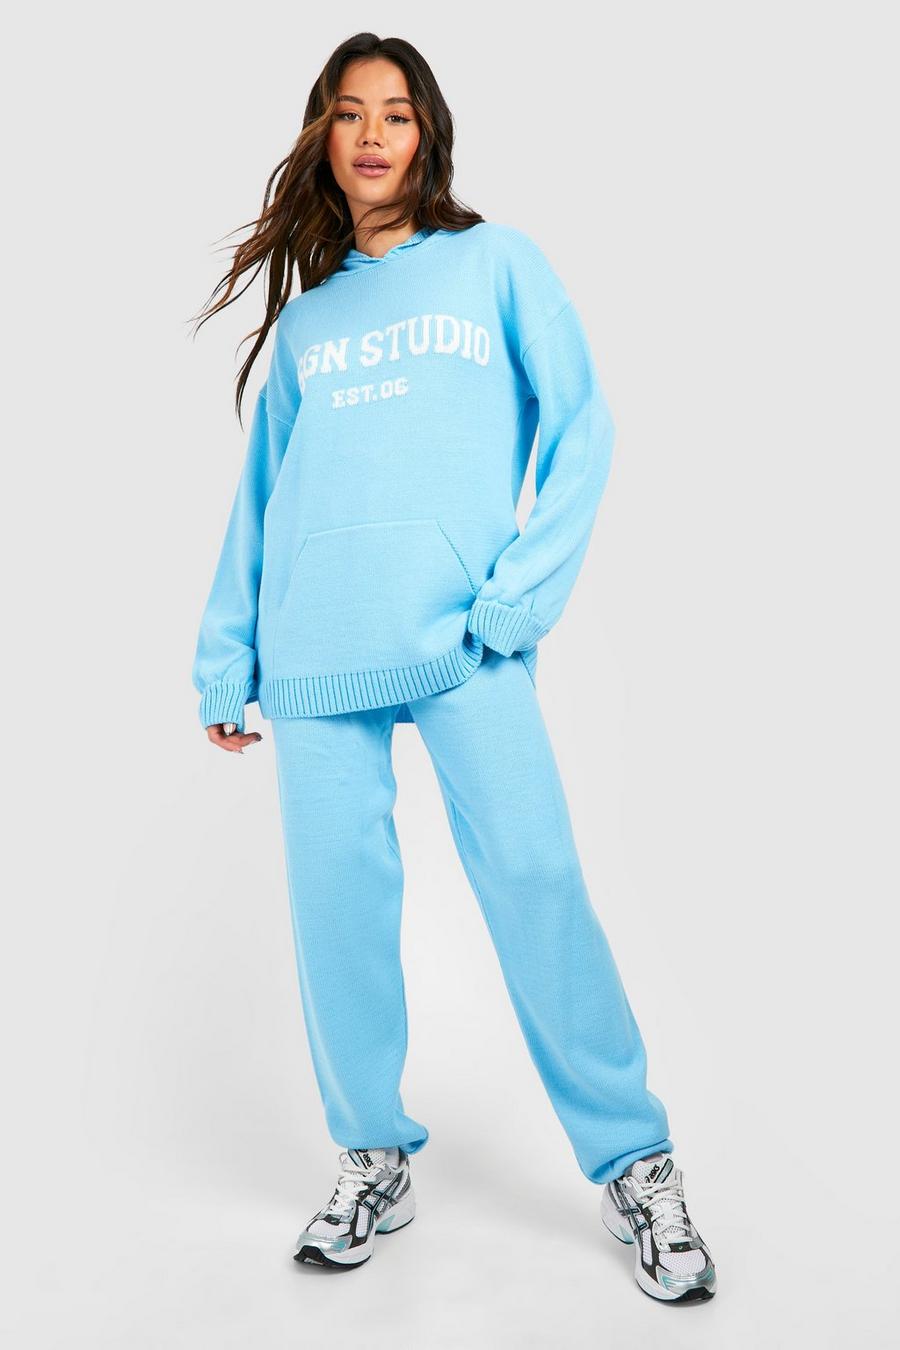 Bright blue Dsgn Studio Oversized Hoody And Jogger Set